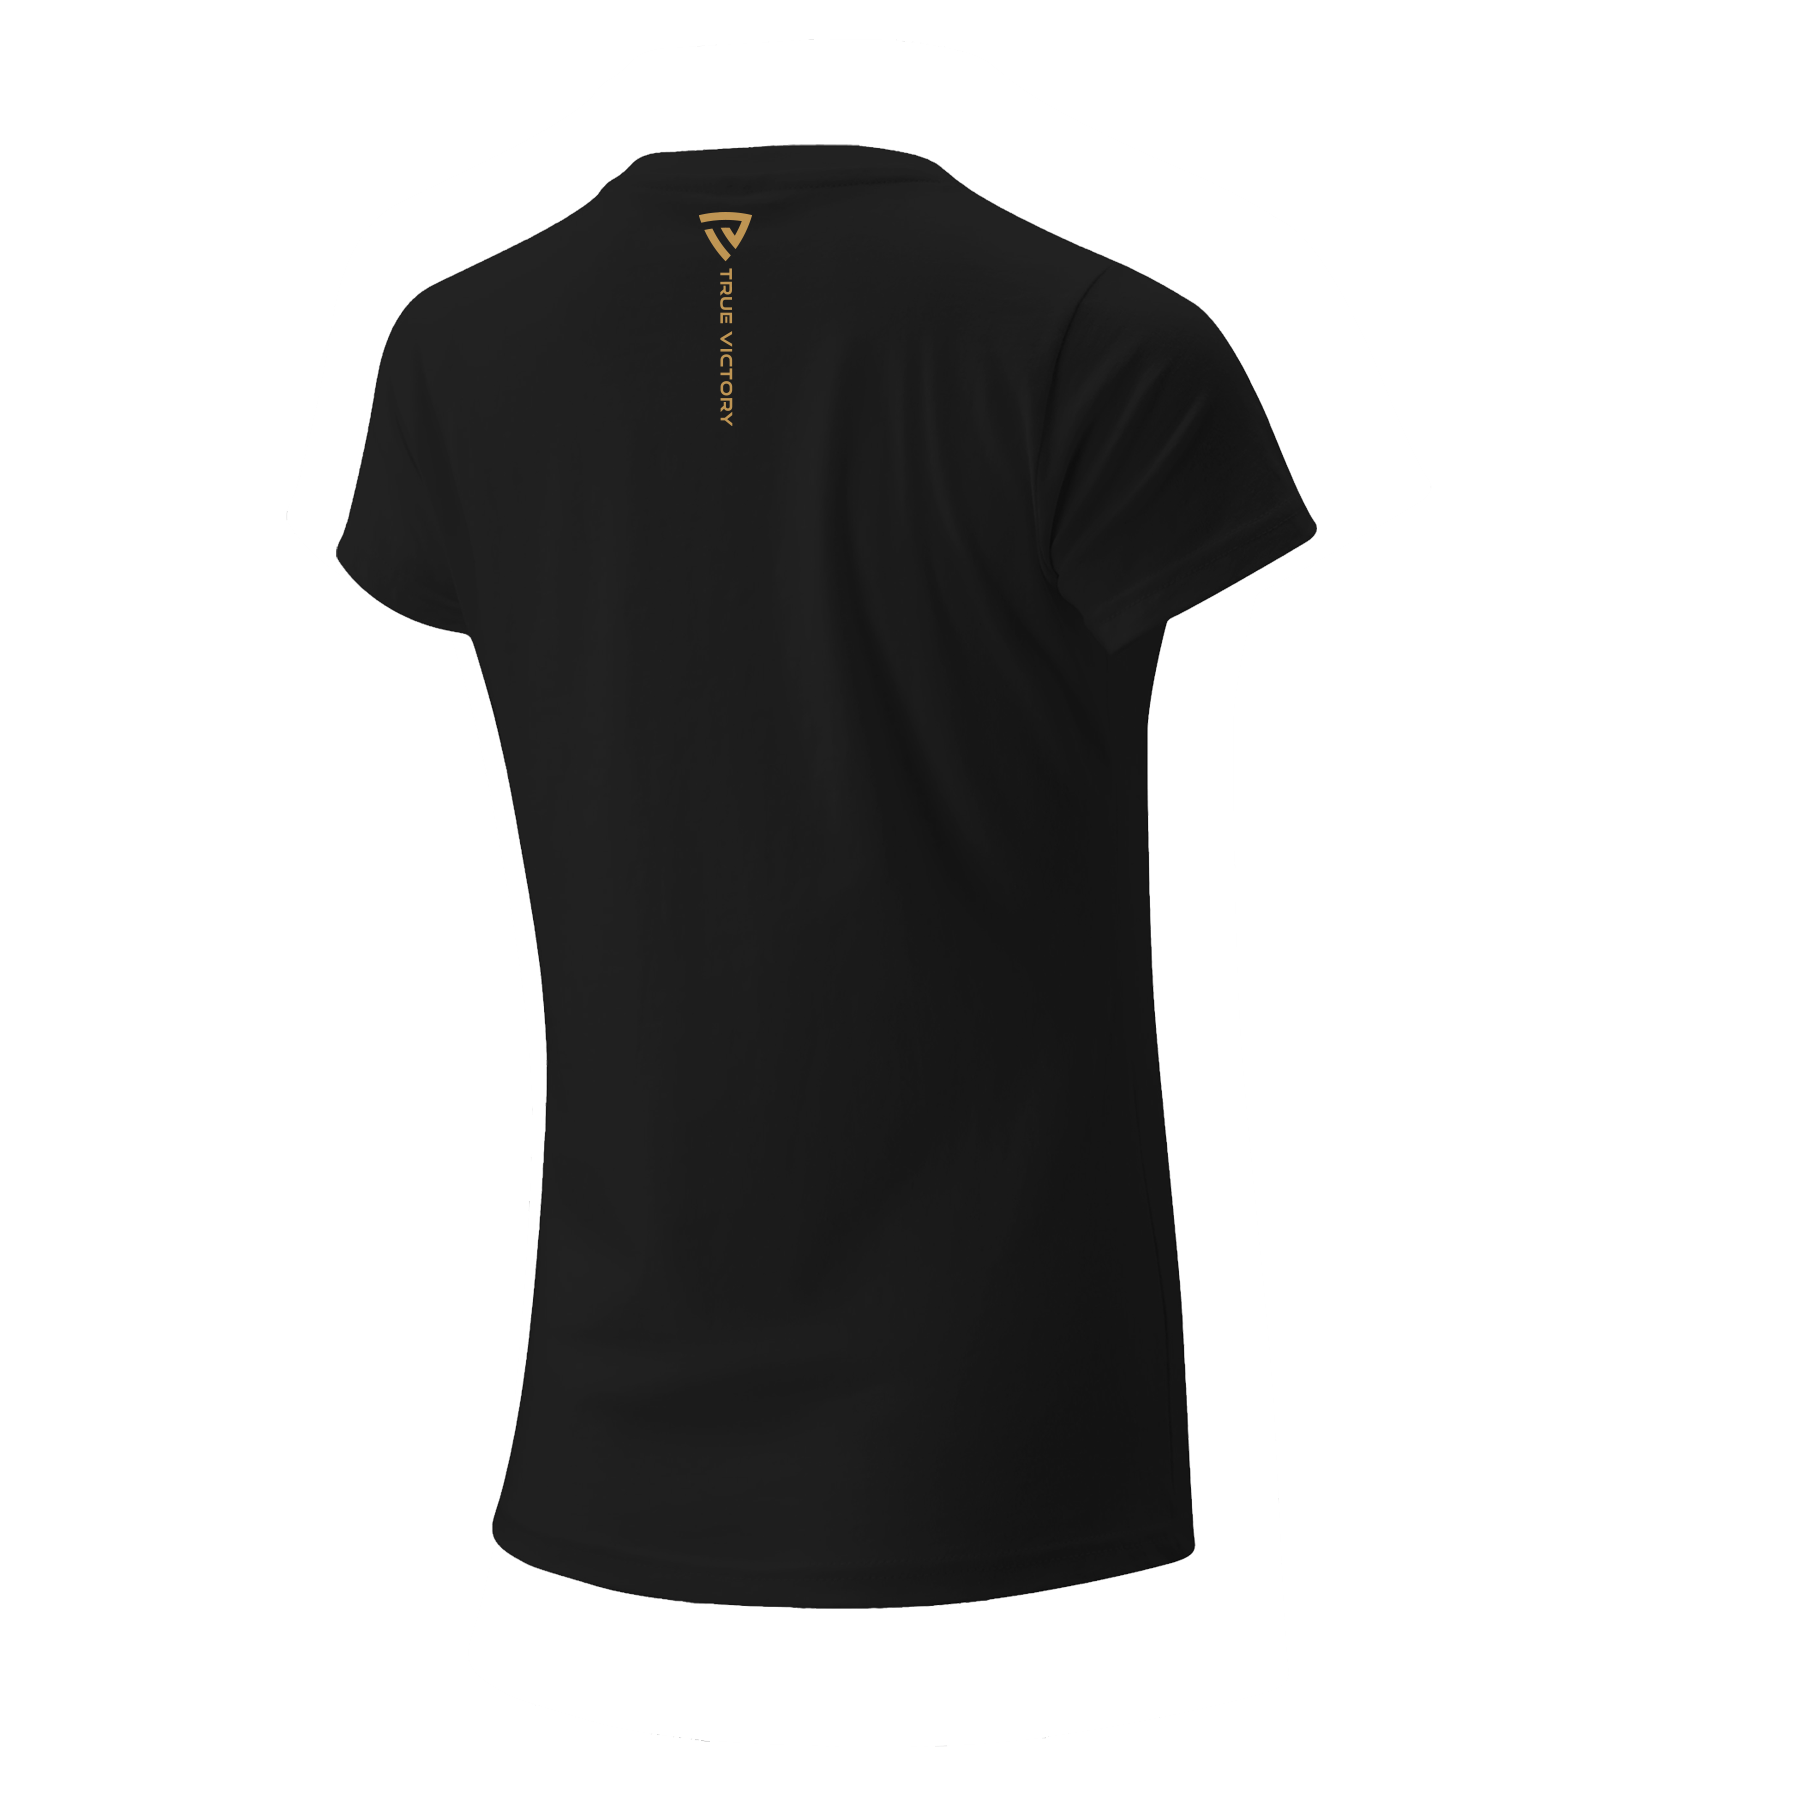 Women's Victorious x Cole Russo Signature Series Black Tee